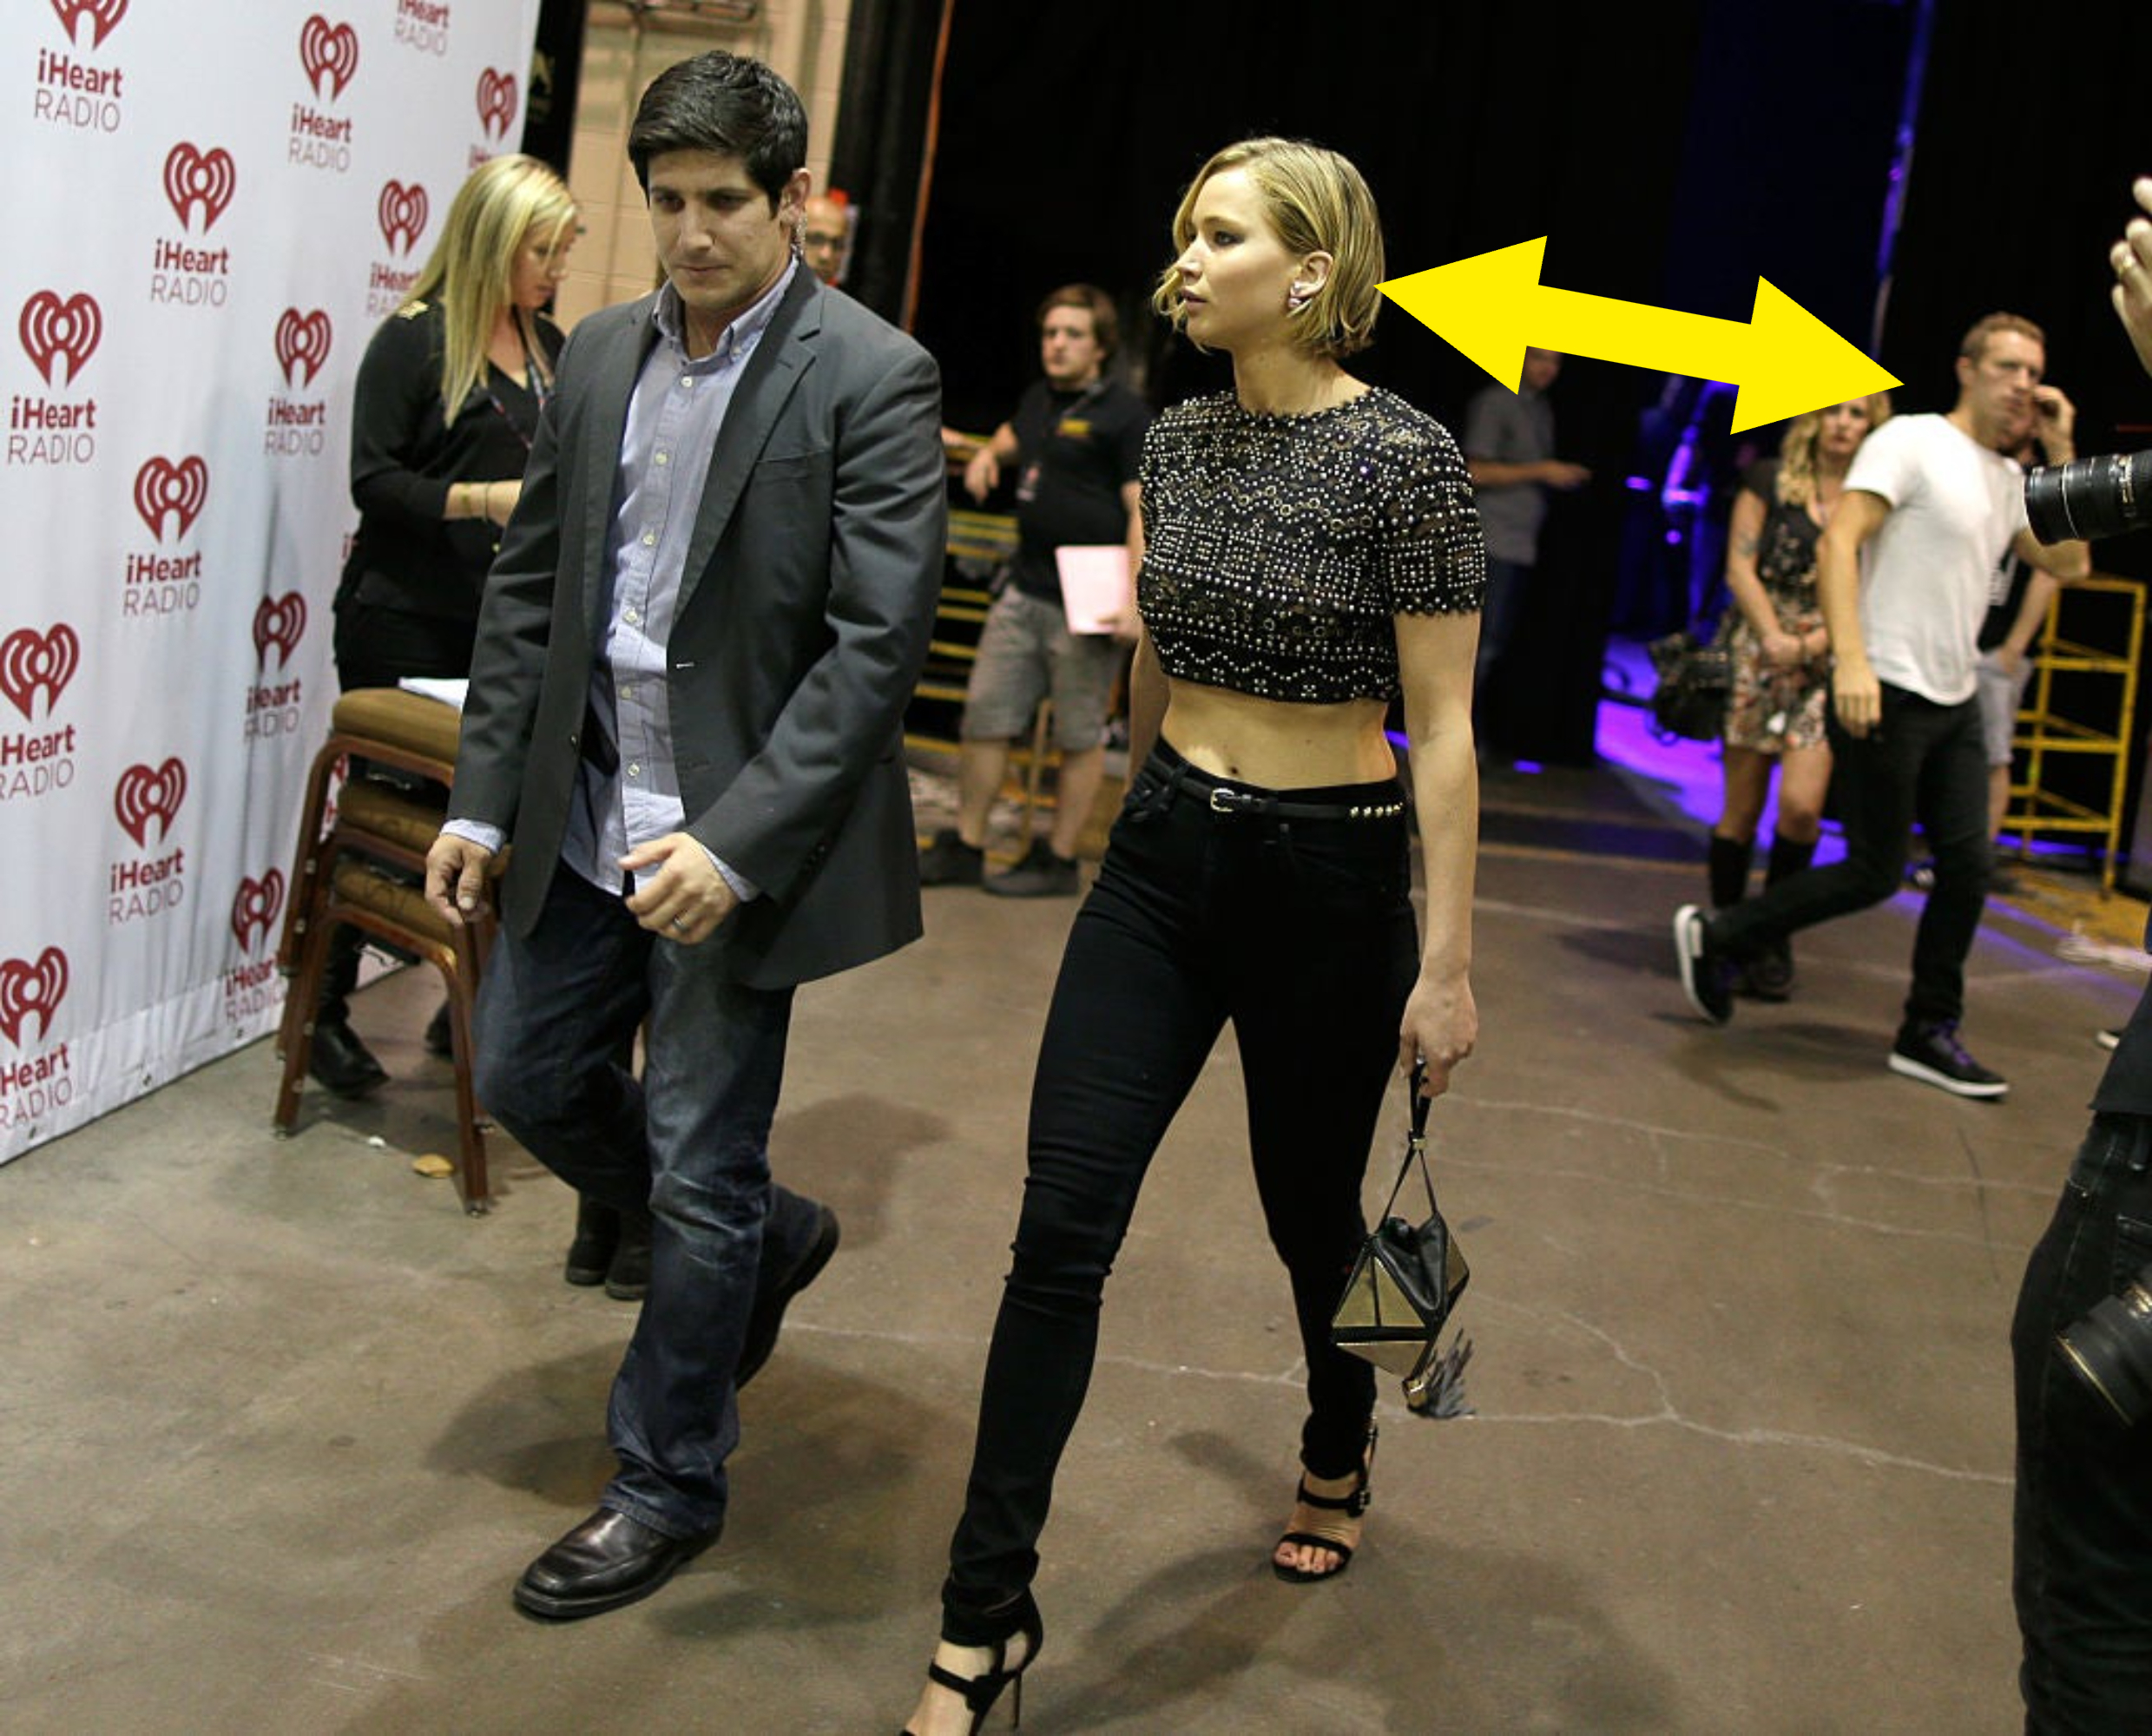 JLaw in cropped top and high-waisted pants and Chris in a T-shirt and jeans behind her walking the other way